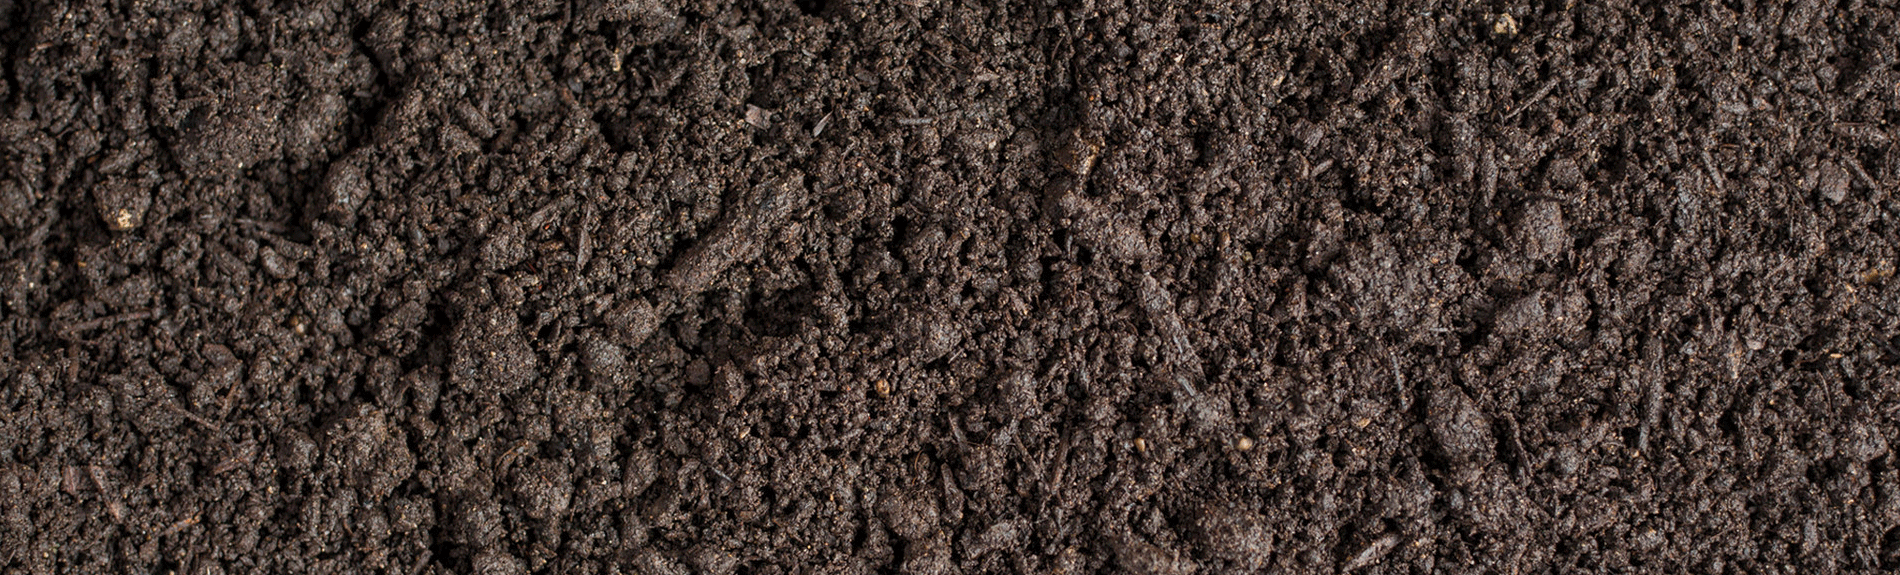 What is Compost, and Why do I need it?